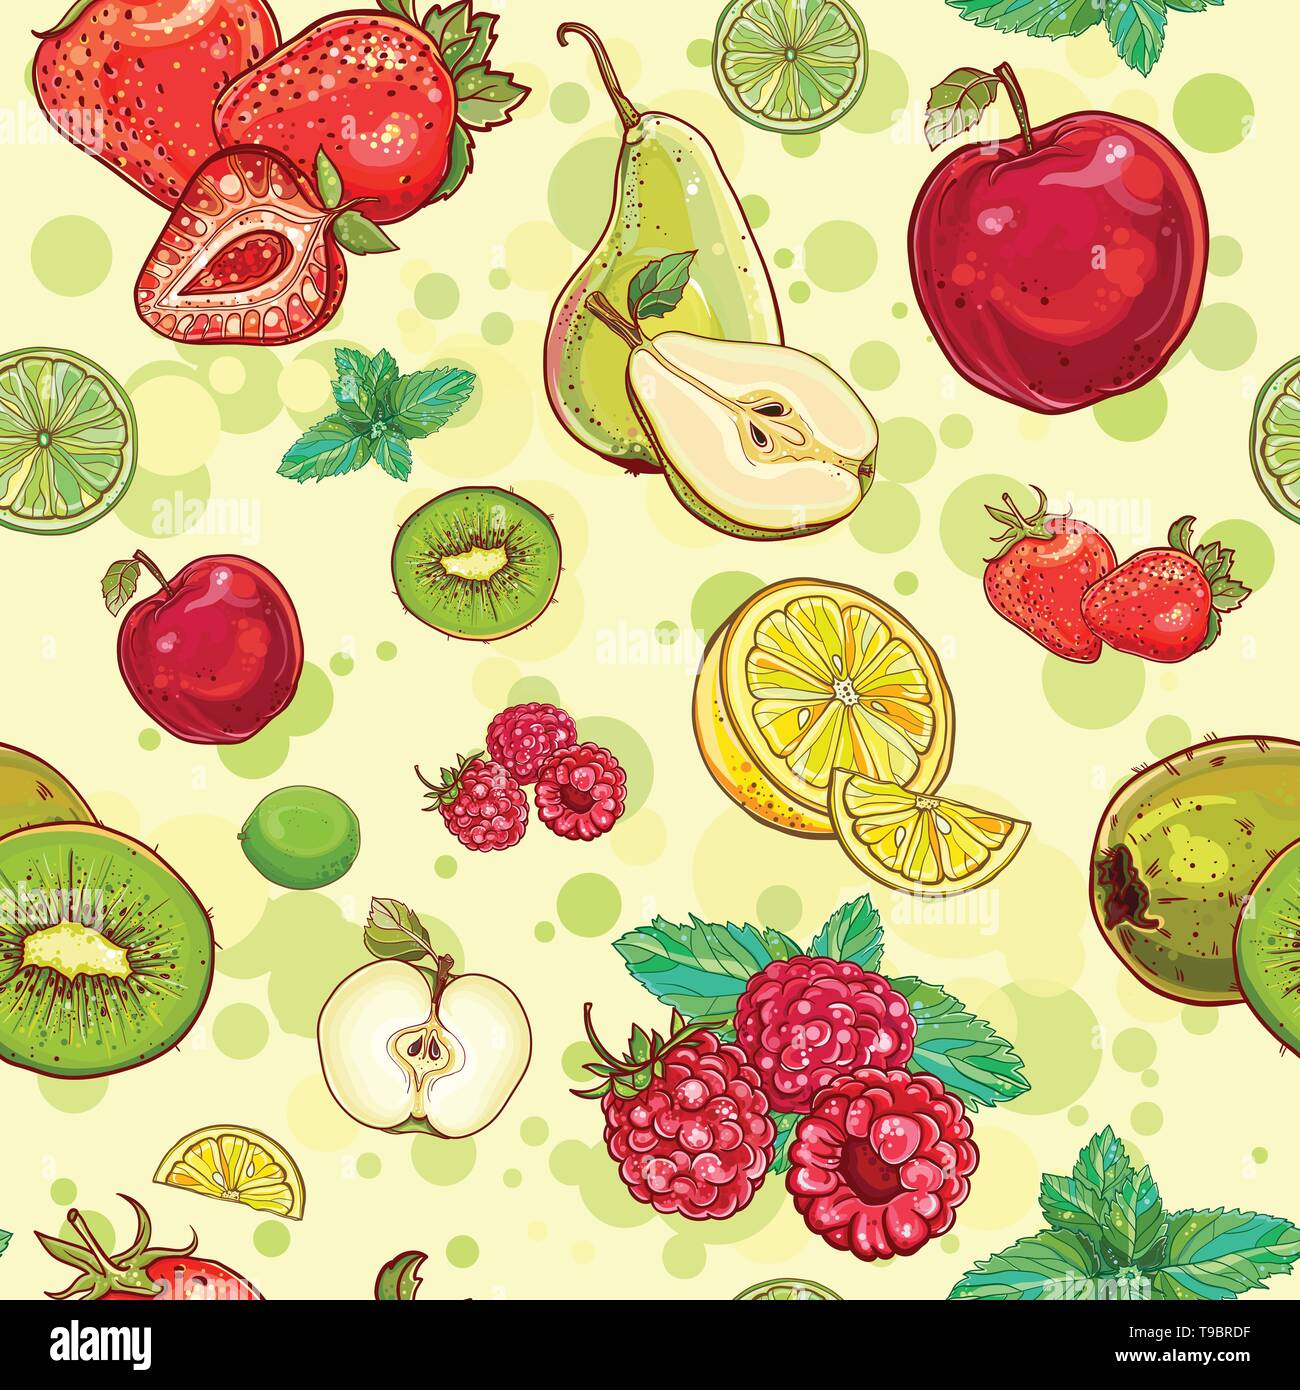 Vector bright seamless pattern with fruits and berries. Apple, kiwi, strawberry, raspberry, pear, lemon, lime, mint. eps 10 Stock Vector